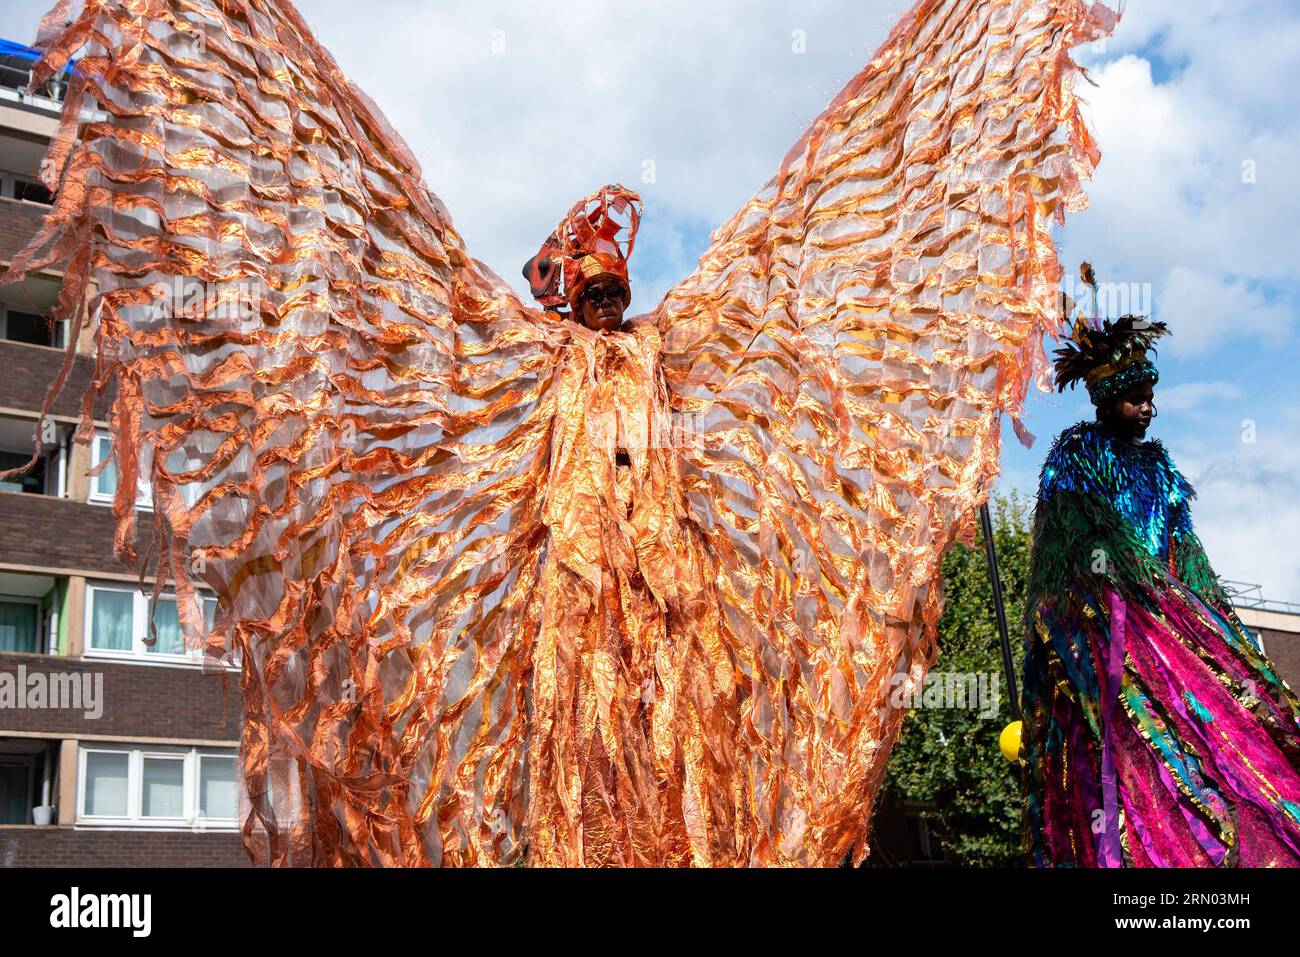 London, UK. 28th Aug, 2023. A dancer waves his costume while walking on stilts during the parade of the Notting Hill Carnival in London. The Notting Hill Carnival is one of the biggest street festivals in the world. It started in 1966 but originated with the Caribbean Carnival organised in 1959 with the immigrant community from Trinidad and Tobago. This year the Notting Hill Carnival marks the 50th anniversary of the introduction of the sound systems and Mas bands. Also it marks the 75th anniversary of the arrival of the passengers of the Empire Windrush to the UK. (Credit Image: Stock Photo